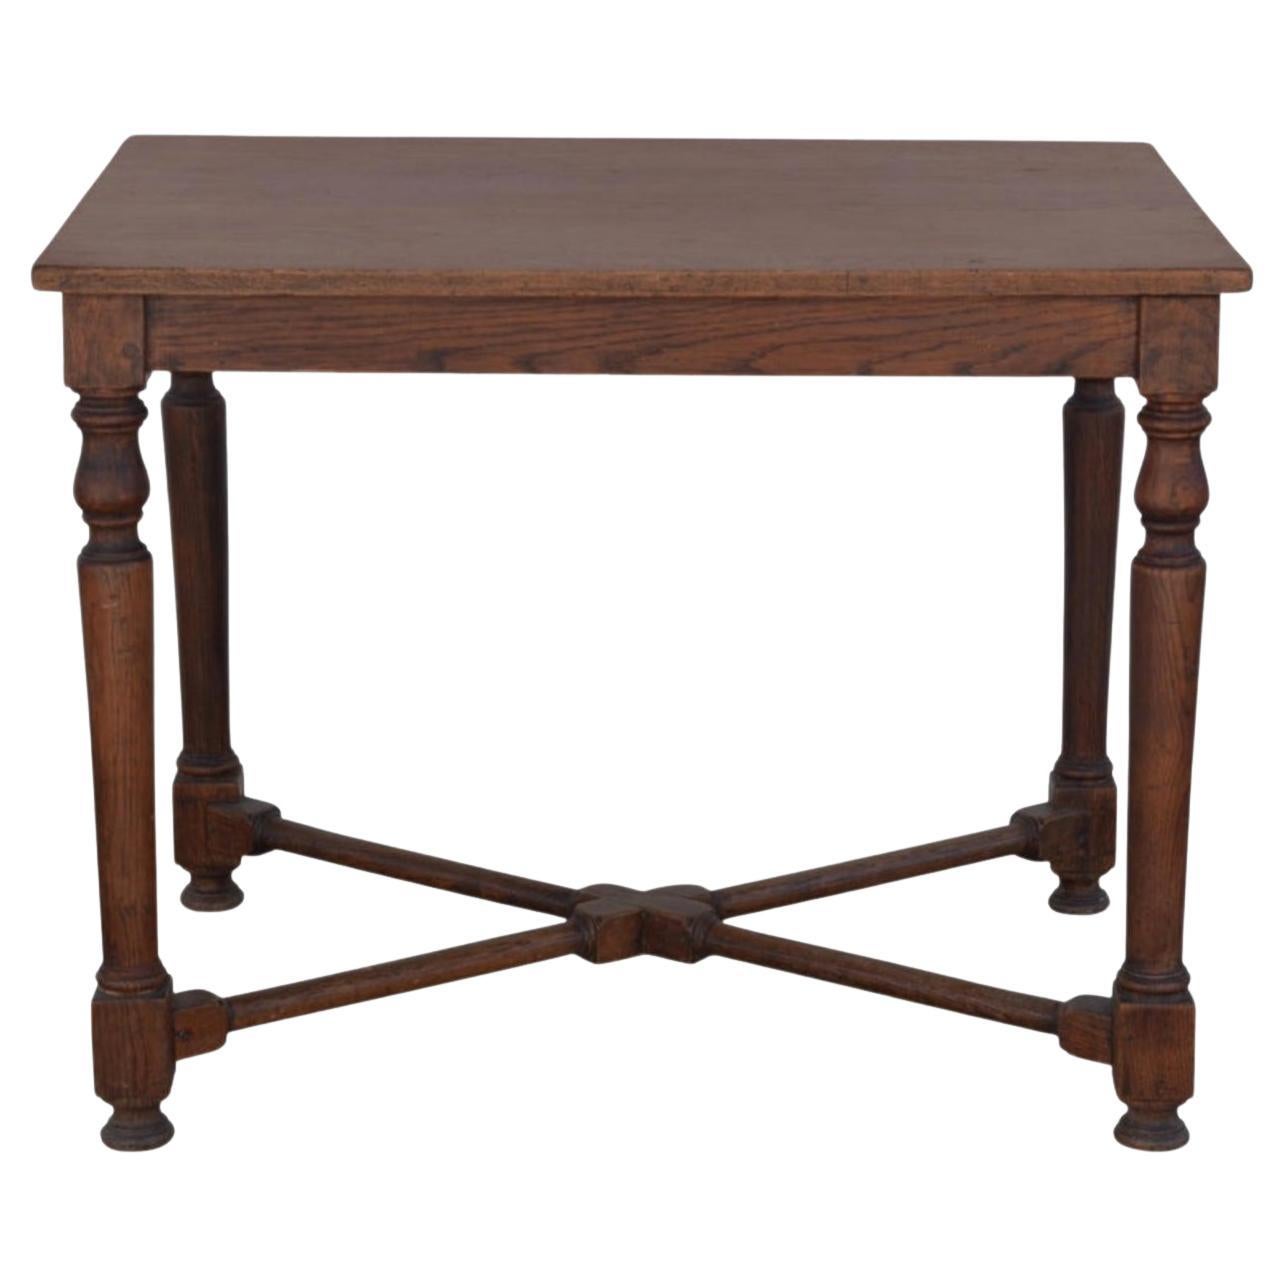 Architectural French Oak Center or Game Table